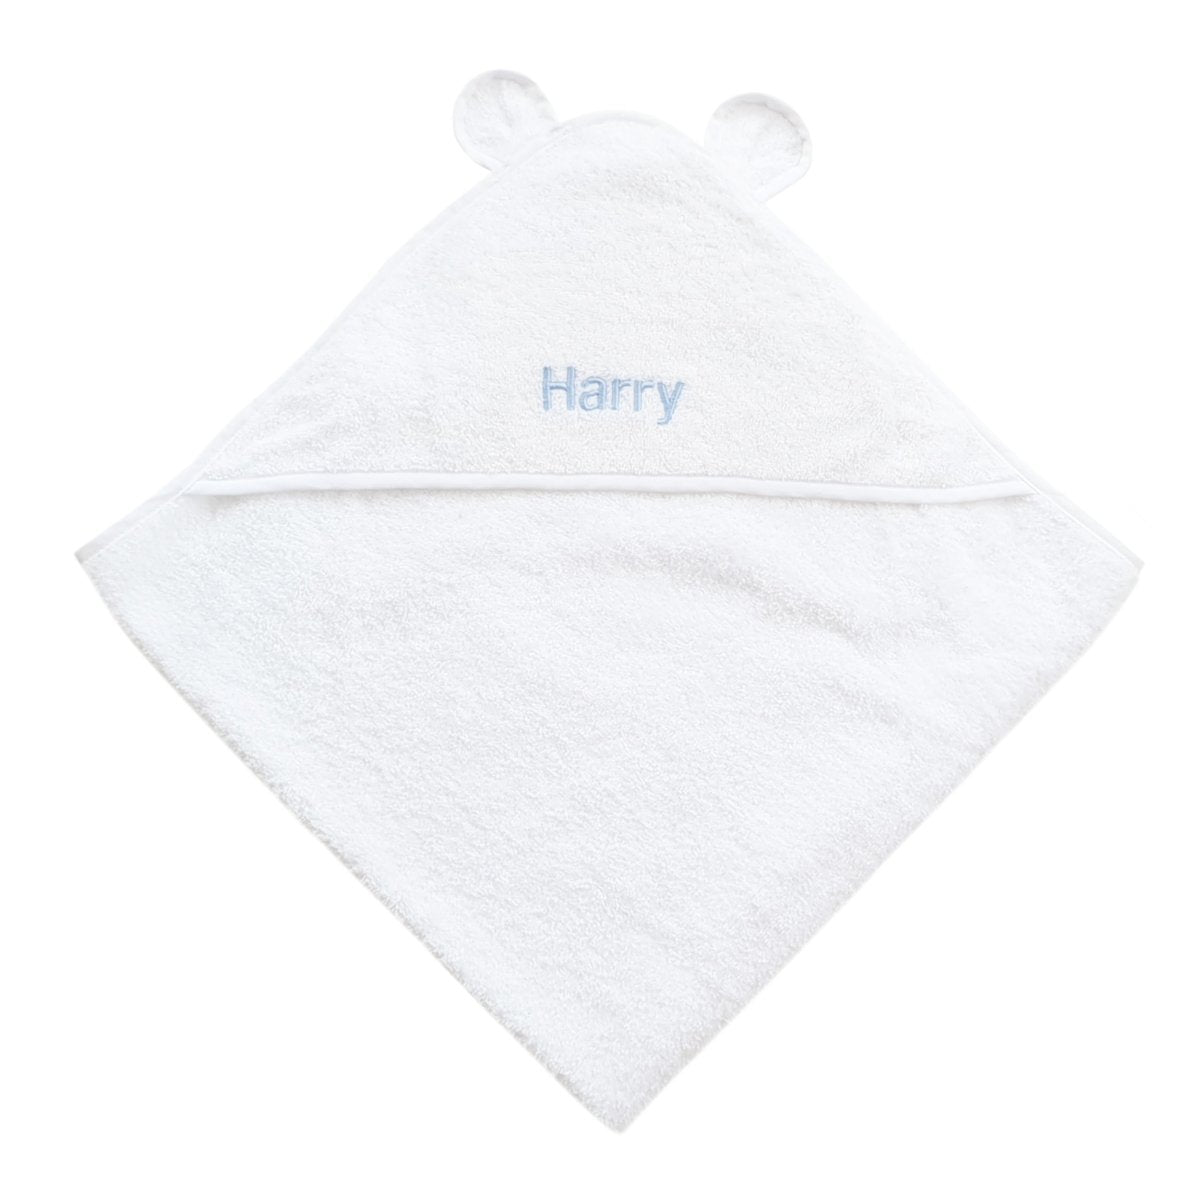 Personalised Luxury White Hooded Towel With Ears - LOVINGLY SIGNED (HK)